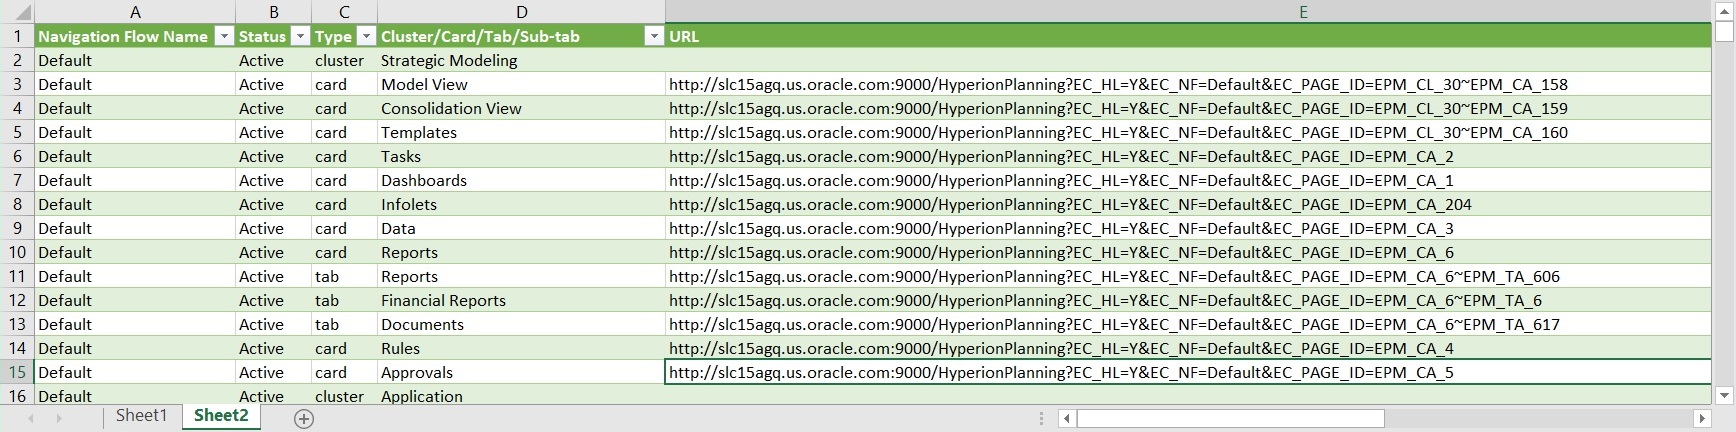 Example Direct URLs Export File as Viewed in Excel